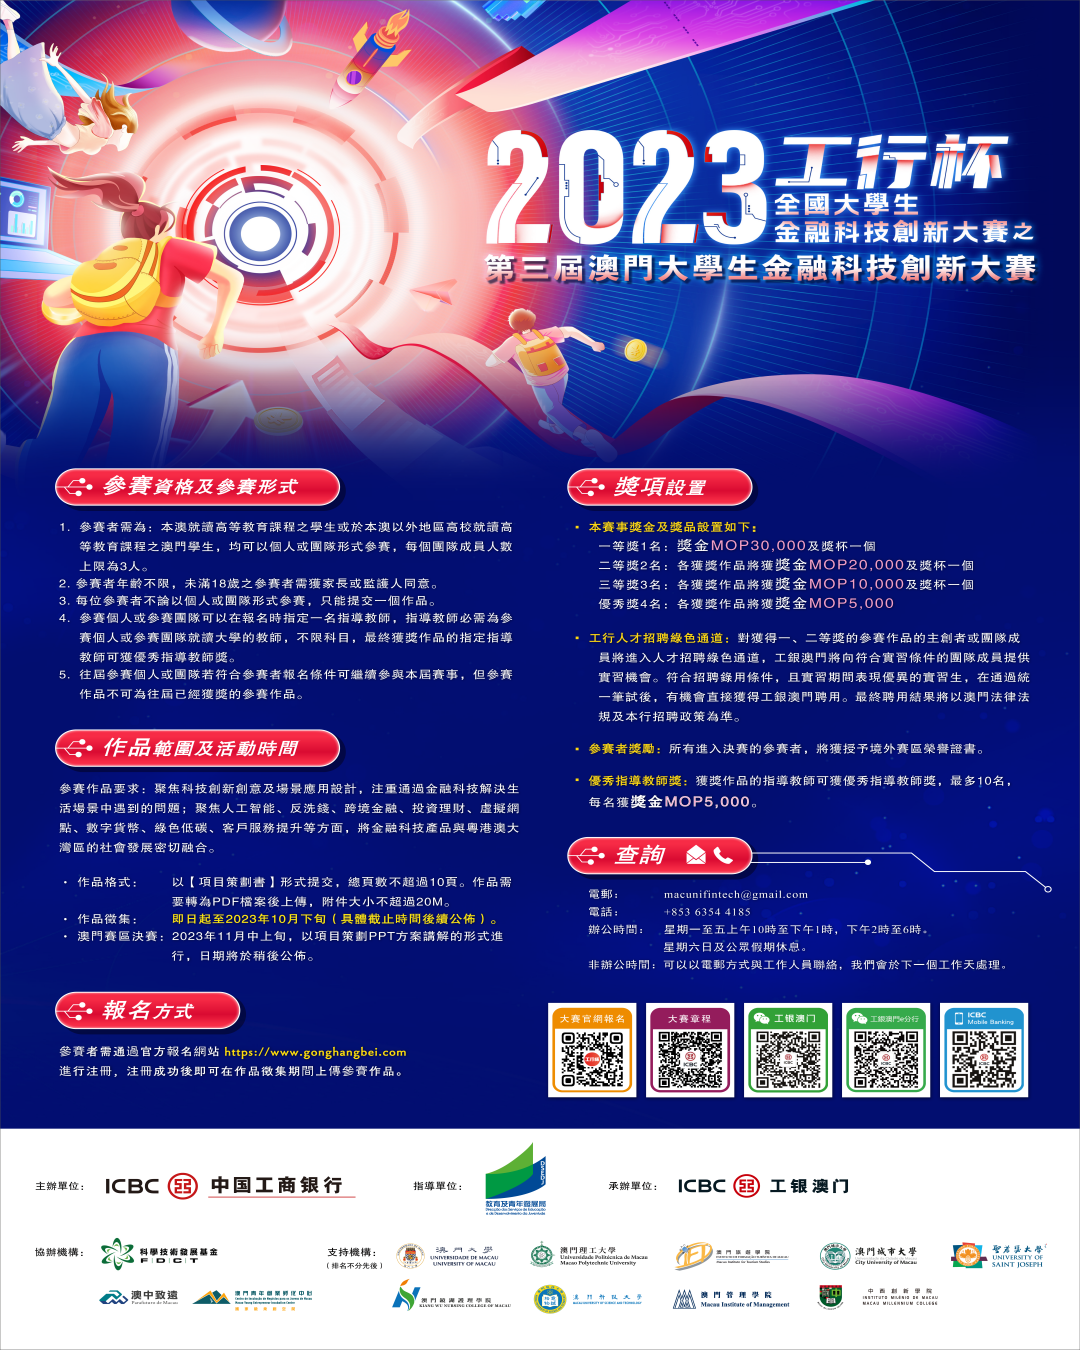 20230926 ICBC poster